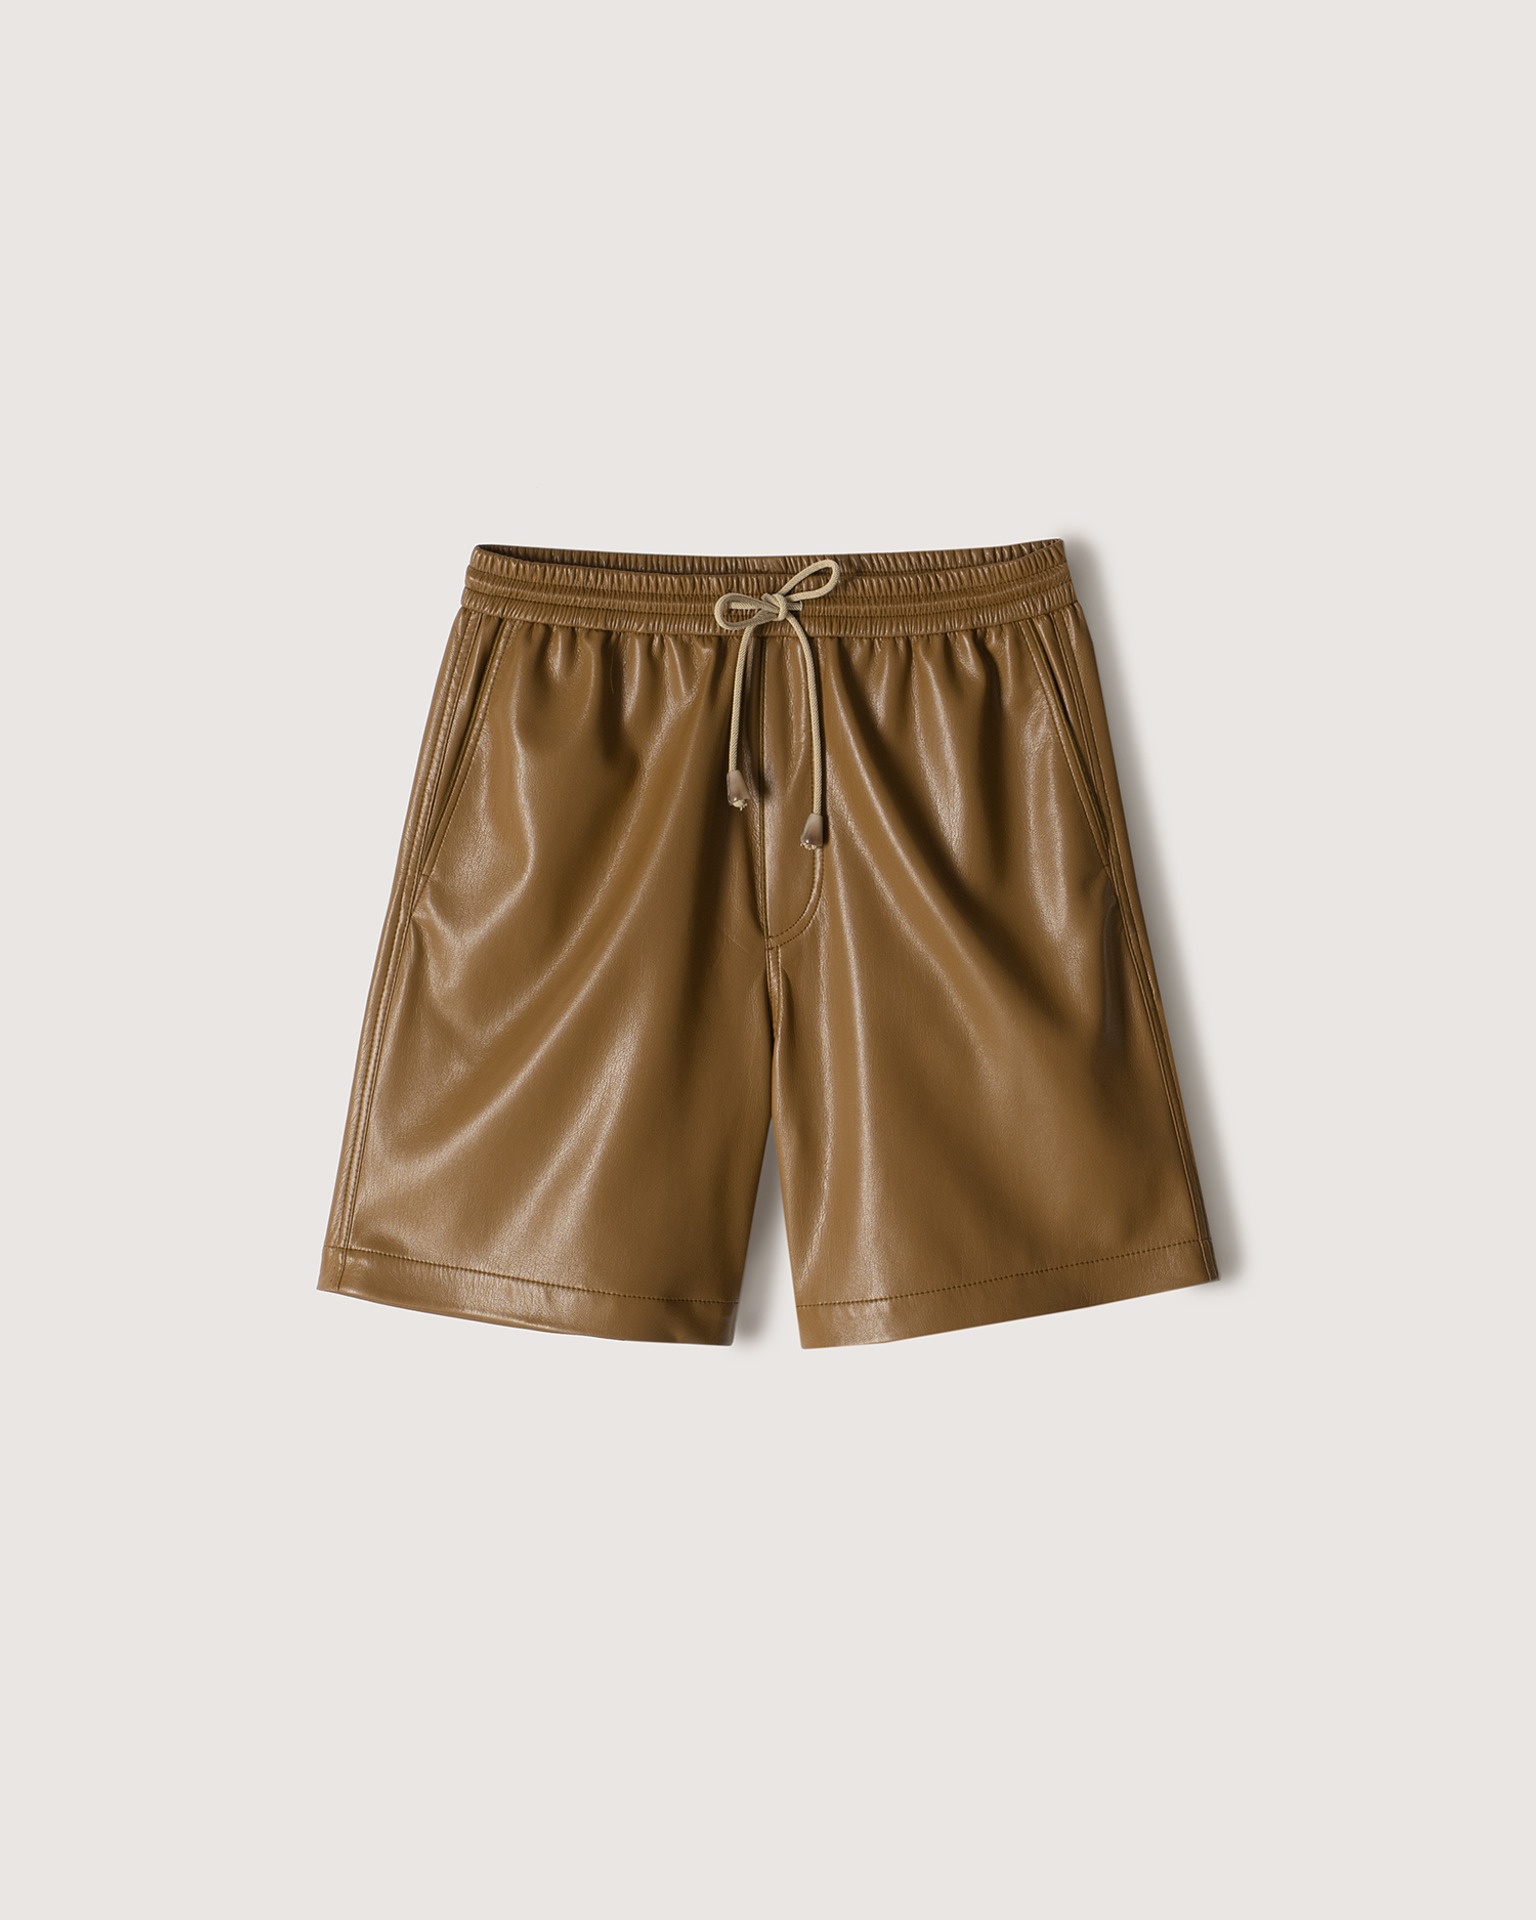 DOXXI - Vegan leather shorts - Curry - 1